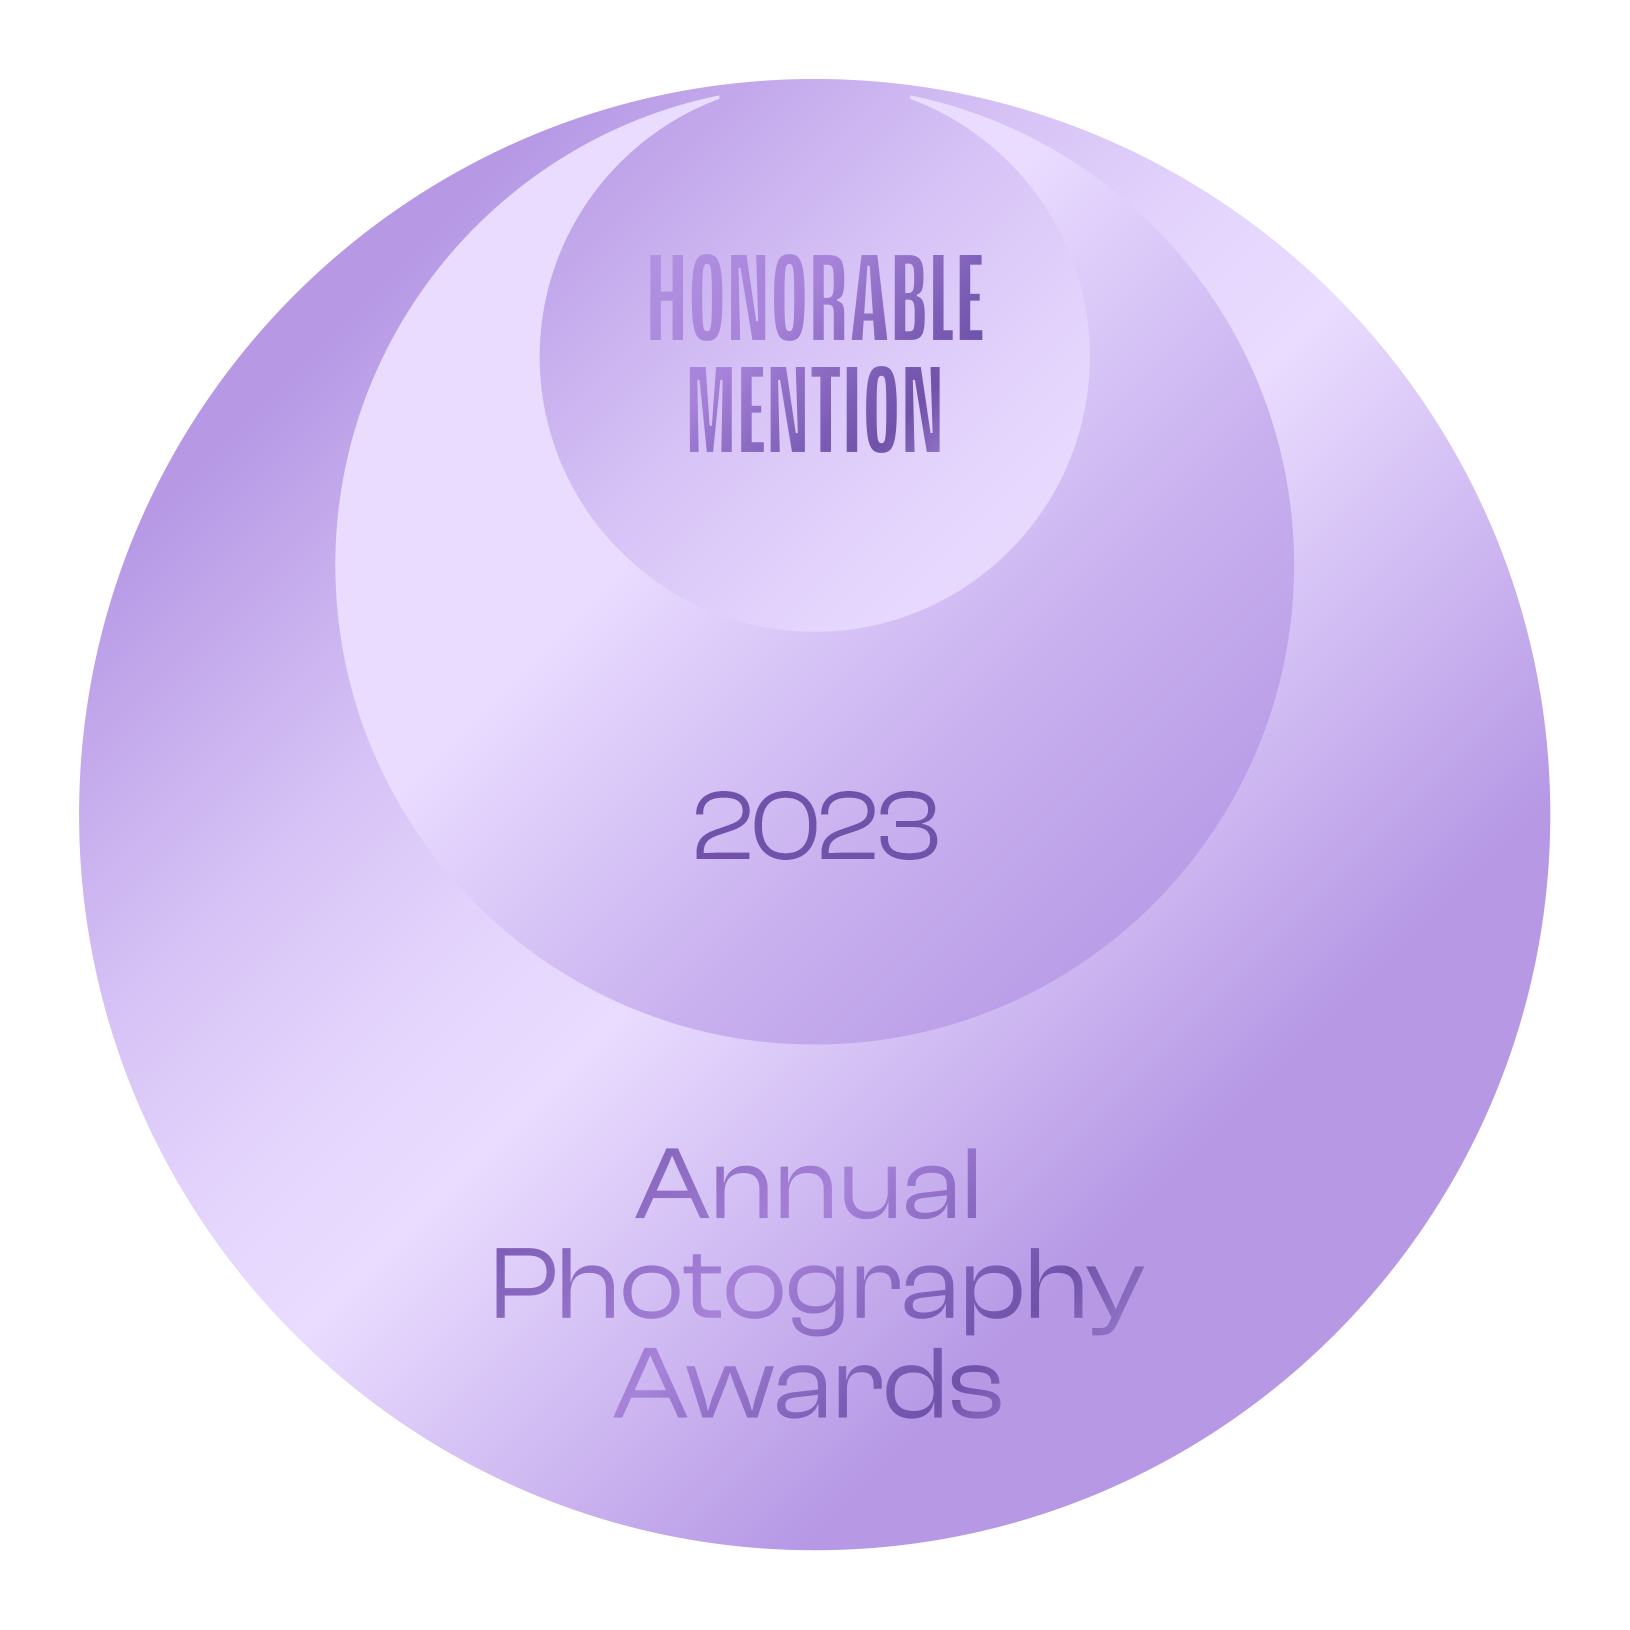 Annual Photography Awards 2023 Honorable Mention badge